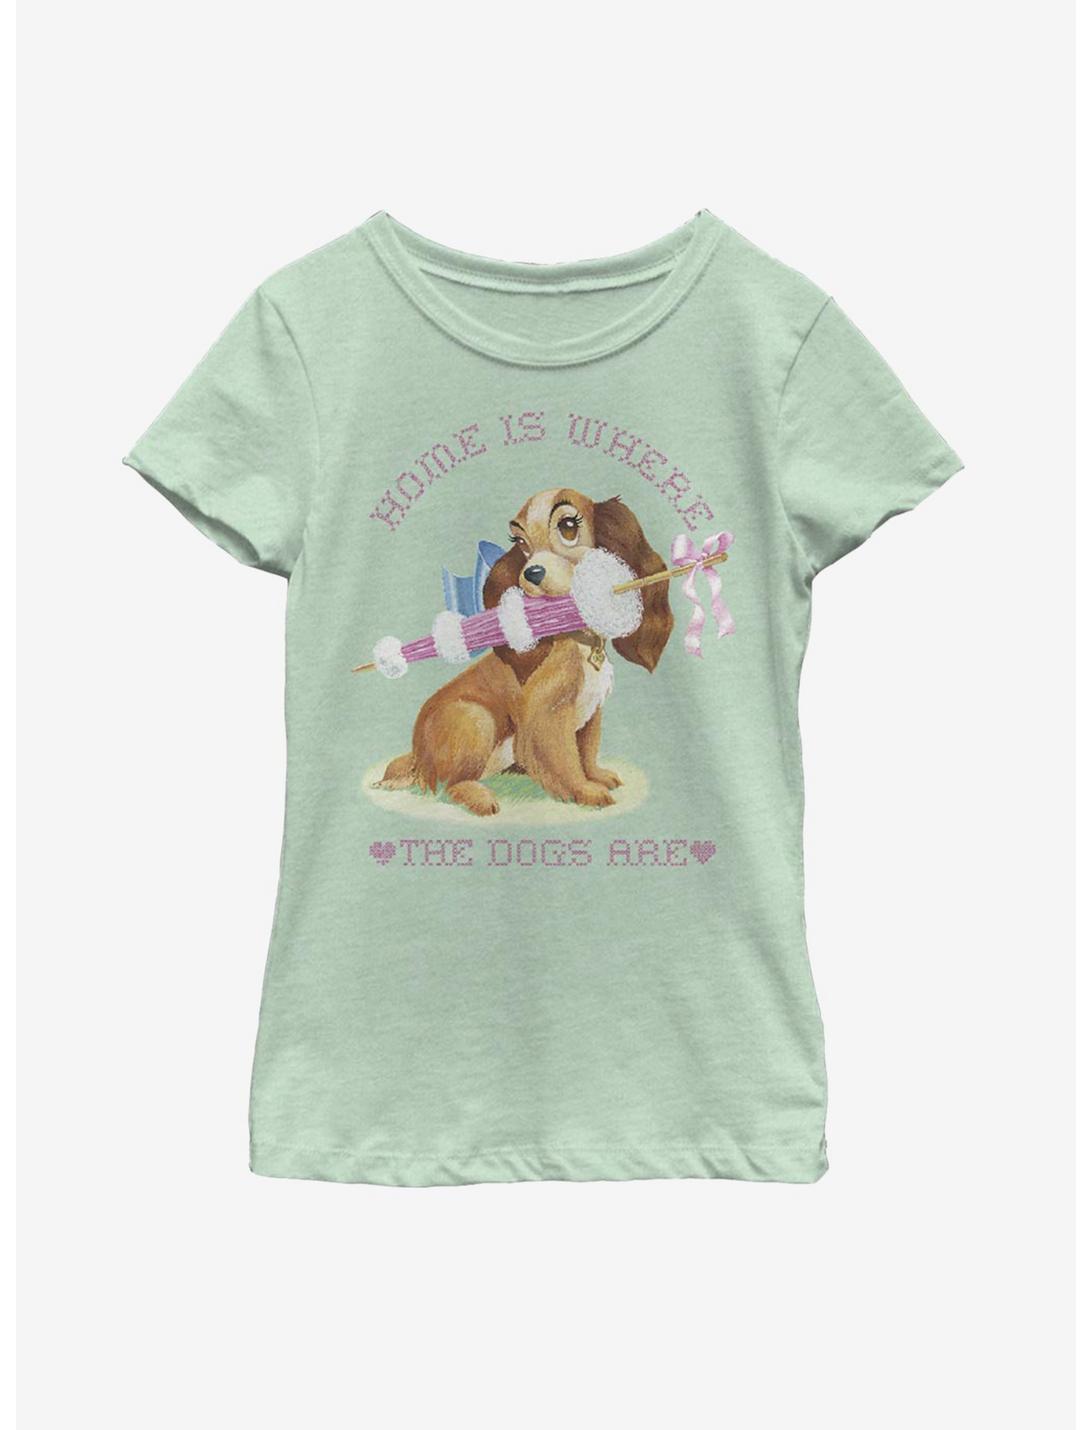 Disney Lady And The Tramp Lady Where The Dogs Are Youth Girls T-Shirt, MINT, hi-res